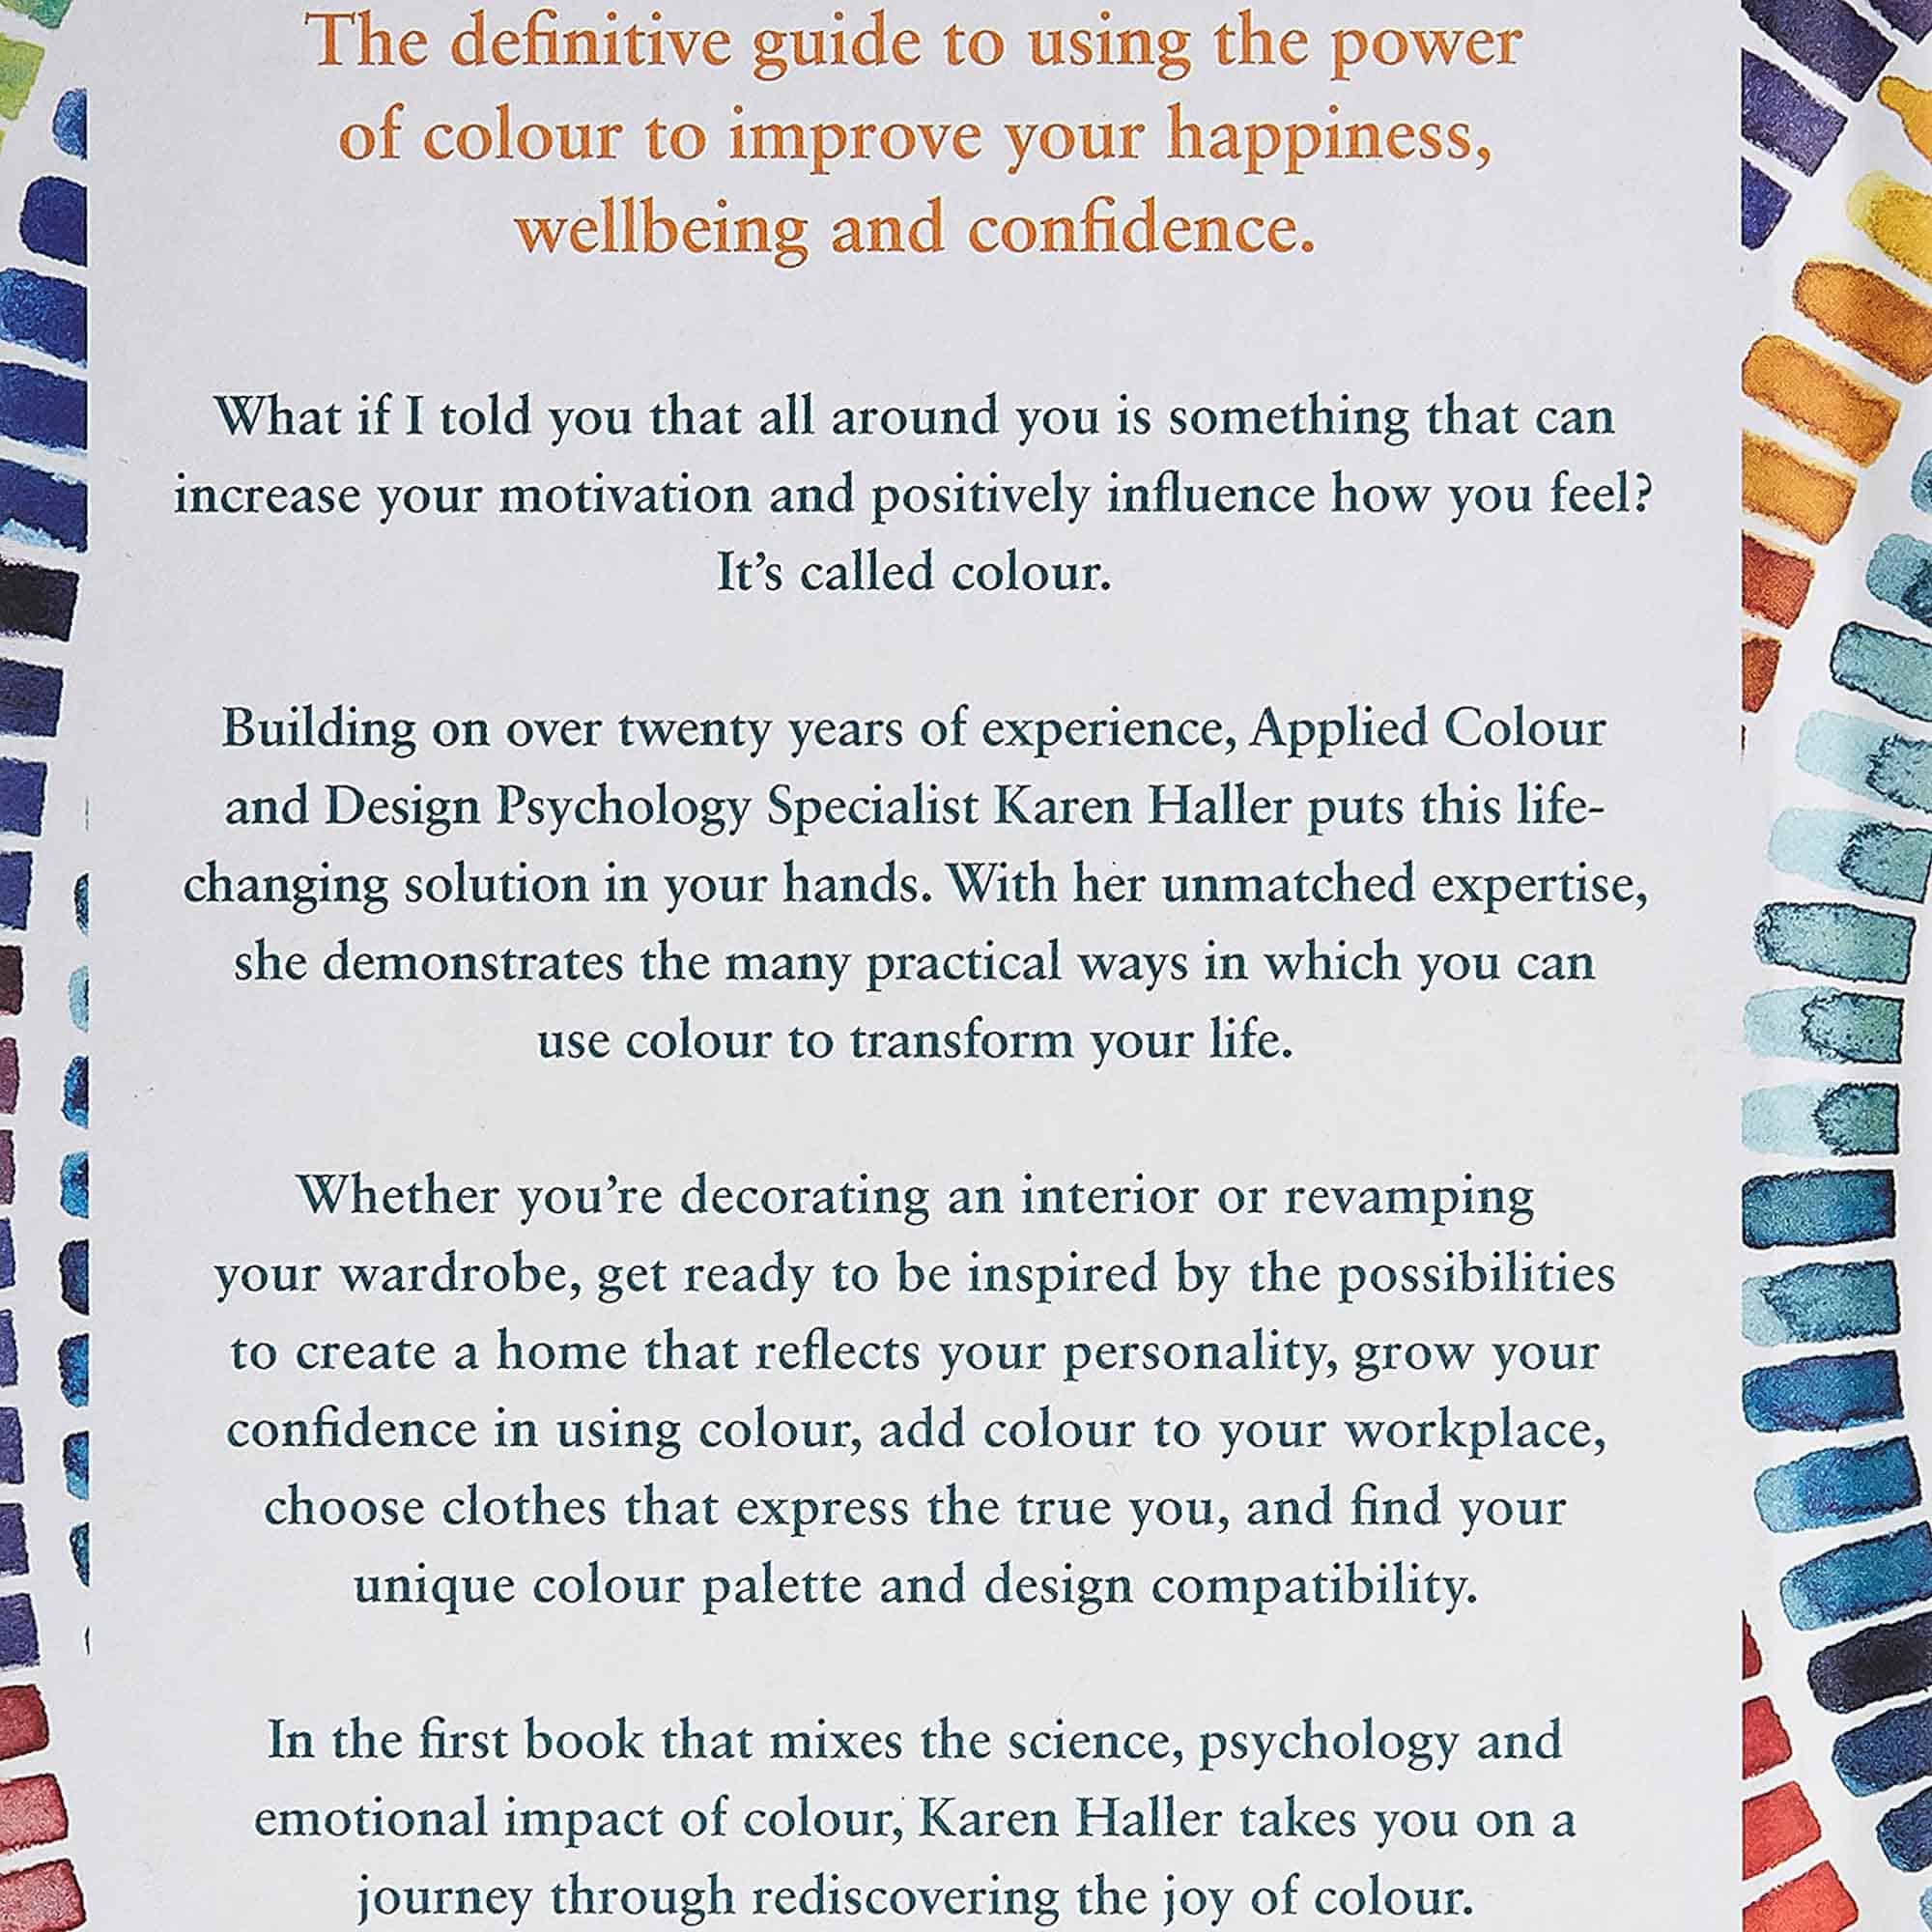 The Little Book of Colour: How to Use the Psychology of Colour to Transform Your Life